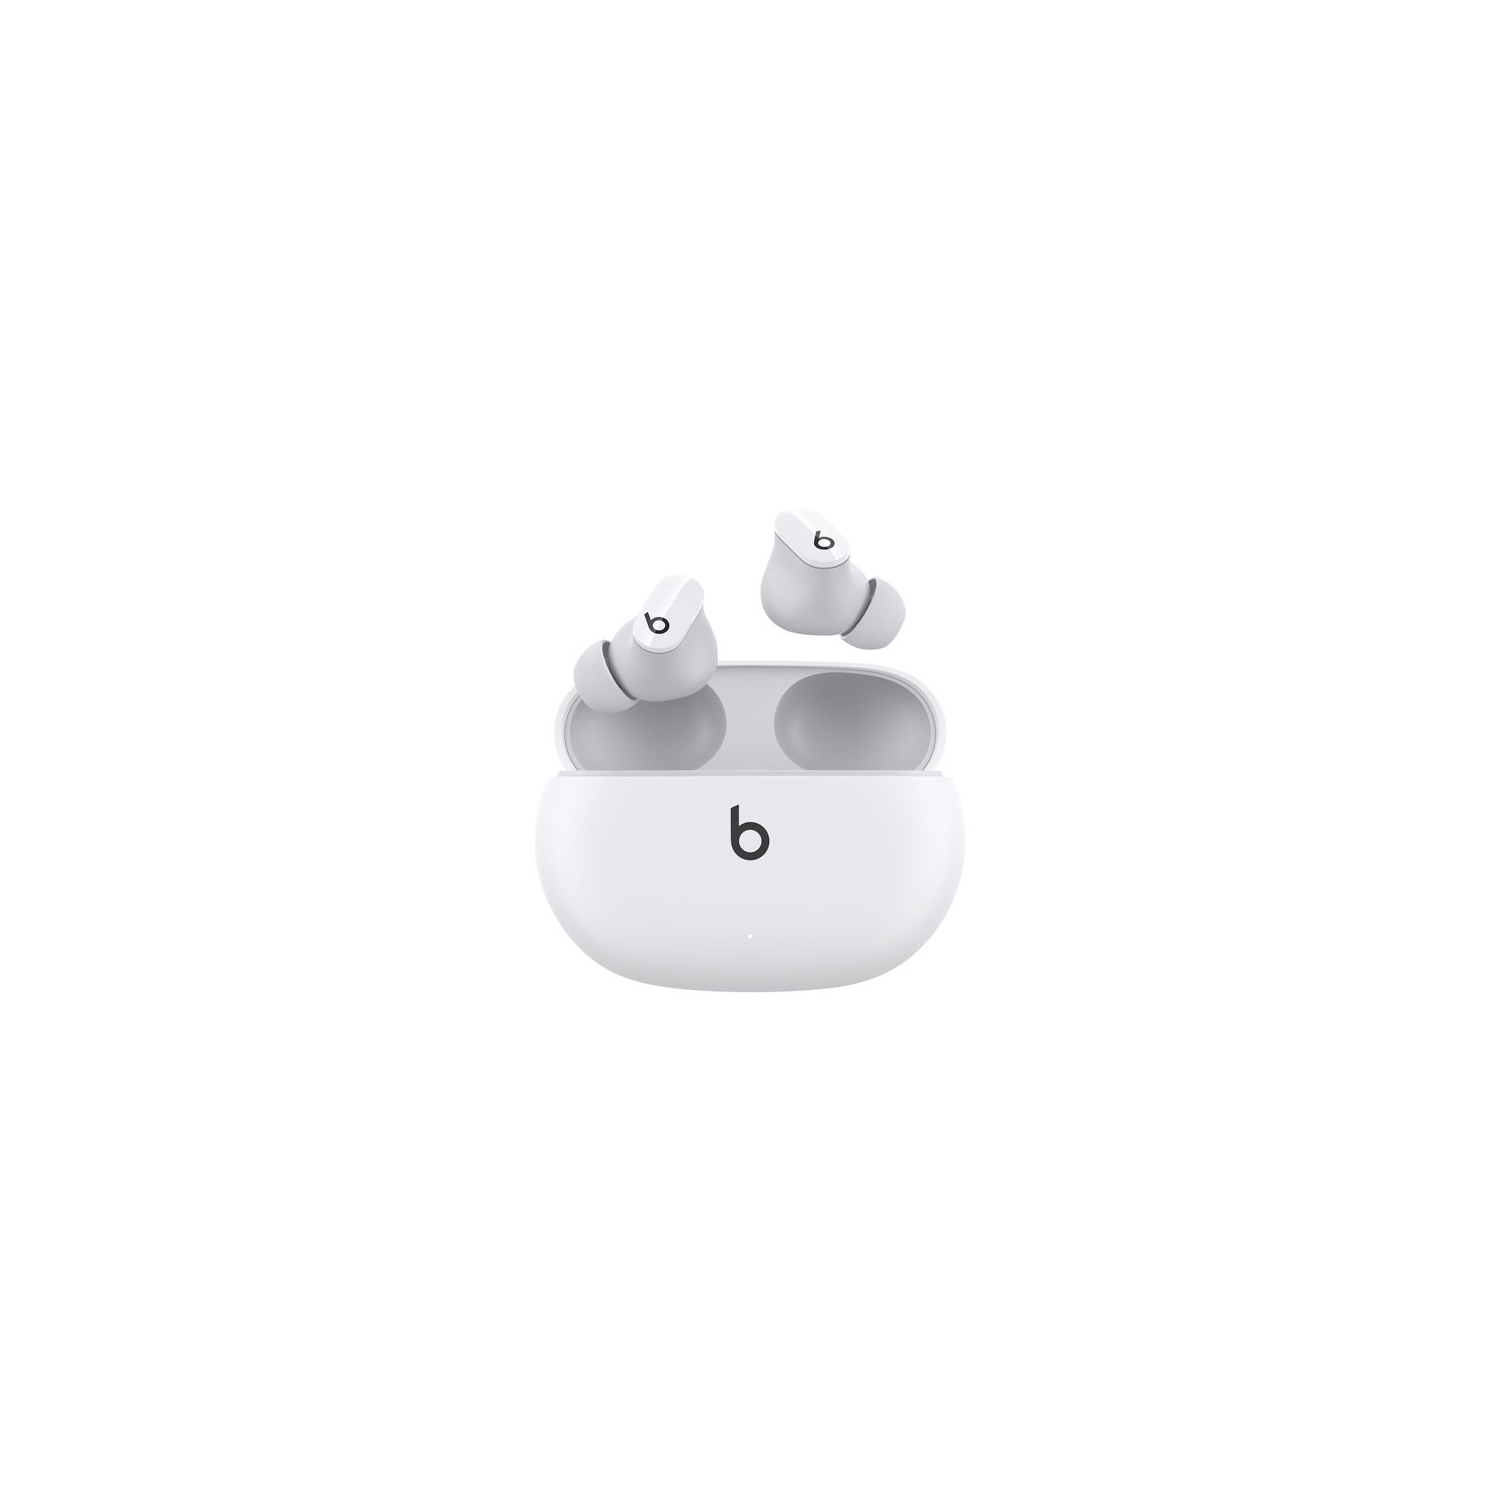 Beats By Dr. Dre Studio Buds In-Ear Noise Cancelling Truly Wireless Headphones - White